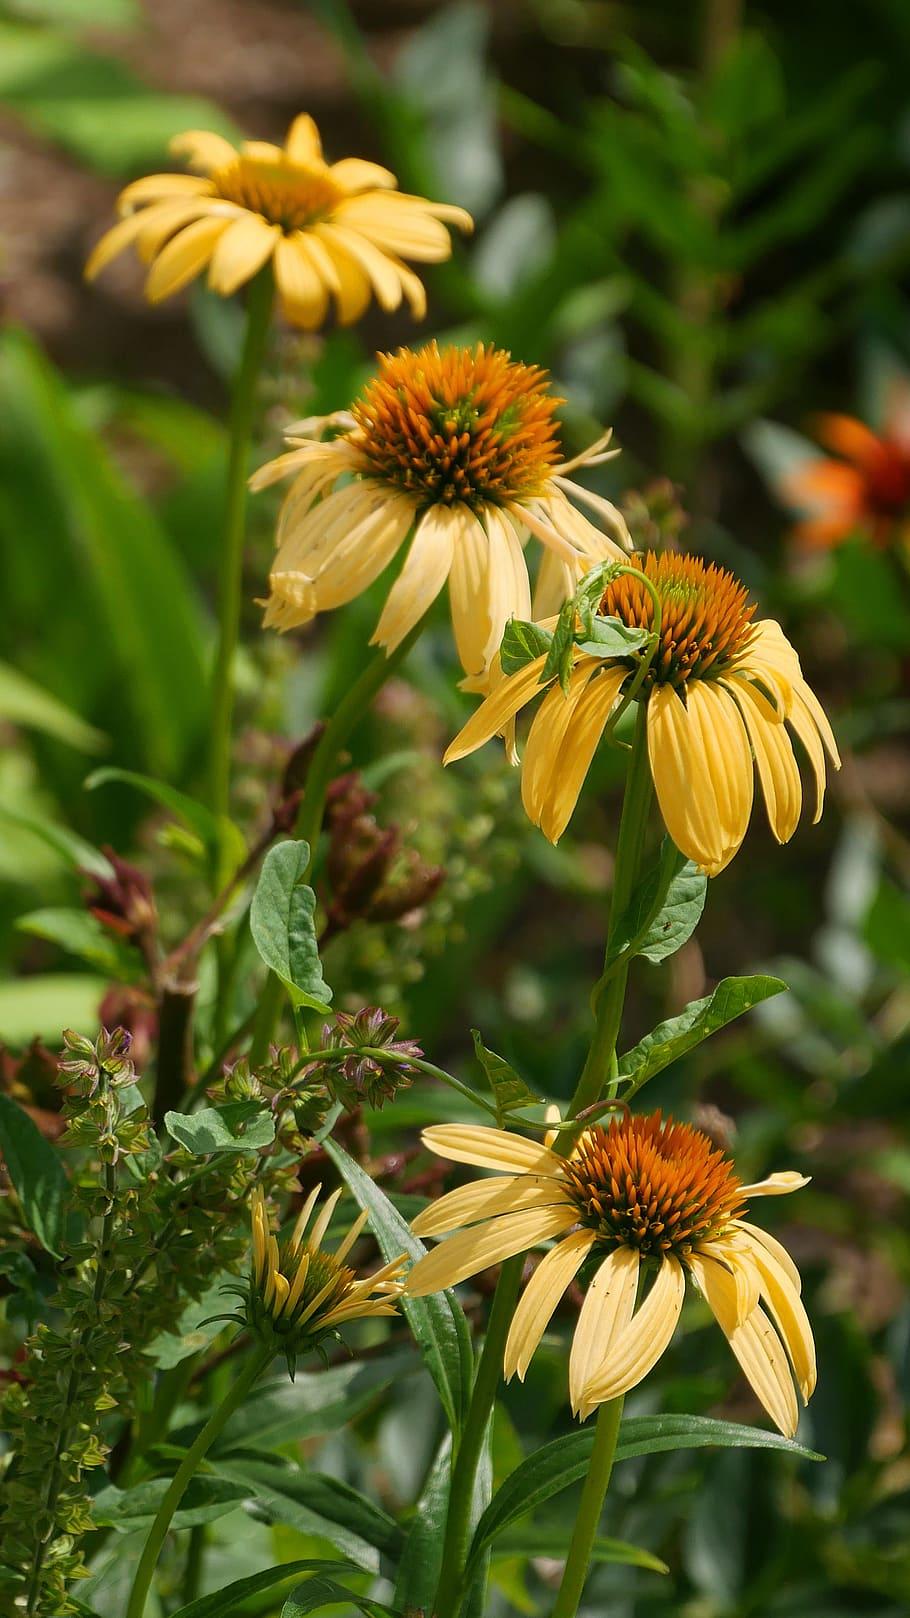 light-orange flowers with orange-green center, green stems and leaves
